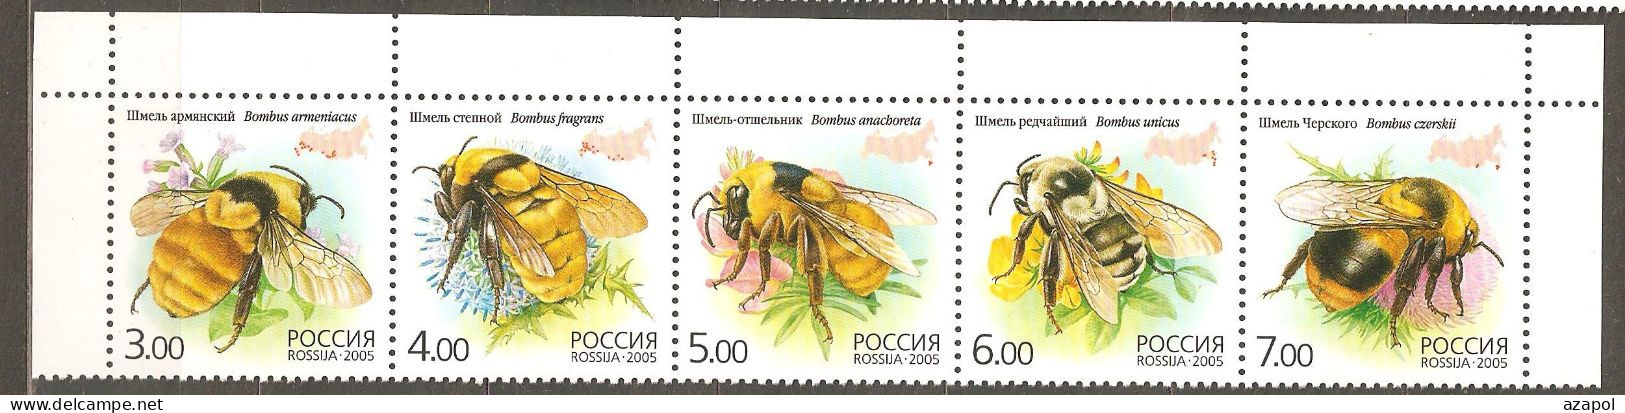 Russia: Full Set Of 5 Mint Stamps In Strip, Bumblebees, 2005, Mi#1266-1270, MNH - Honeybees